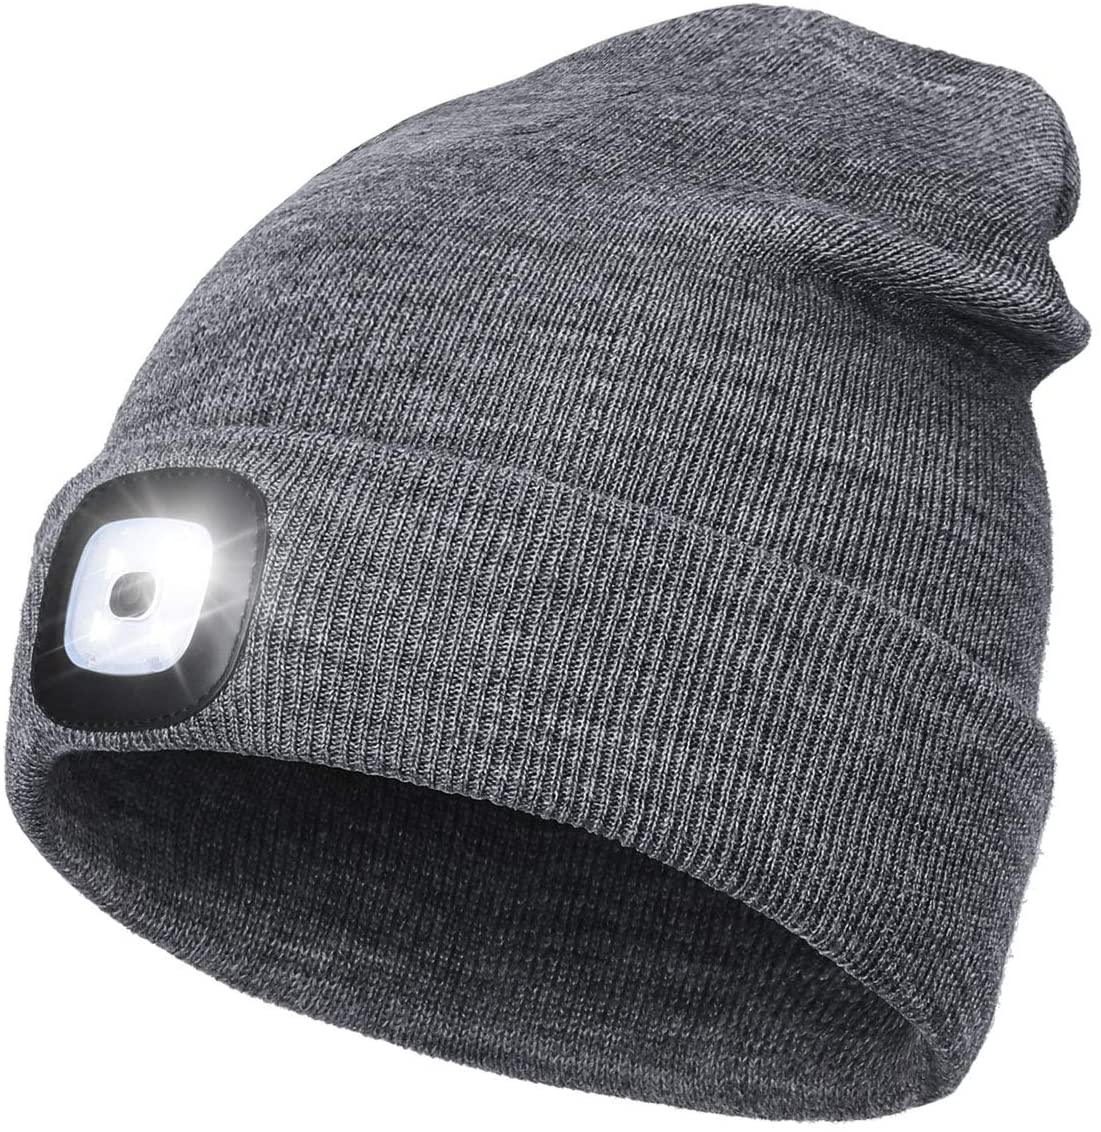 LED Beanie Hat with Light,Unisex USB Rechargeable Hands Free LED Headlamp  Cap Winter Knitted Night Lighted Hat Flashlight Women Men Gifts for Dad Him  Husband (Grey)